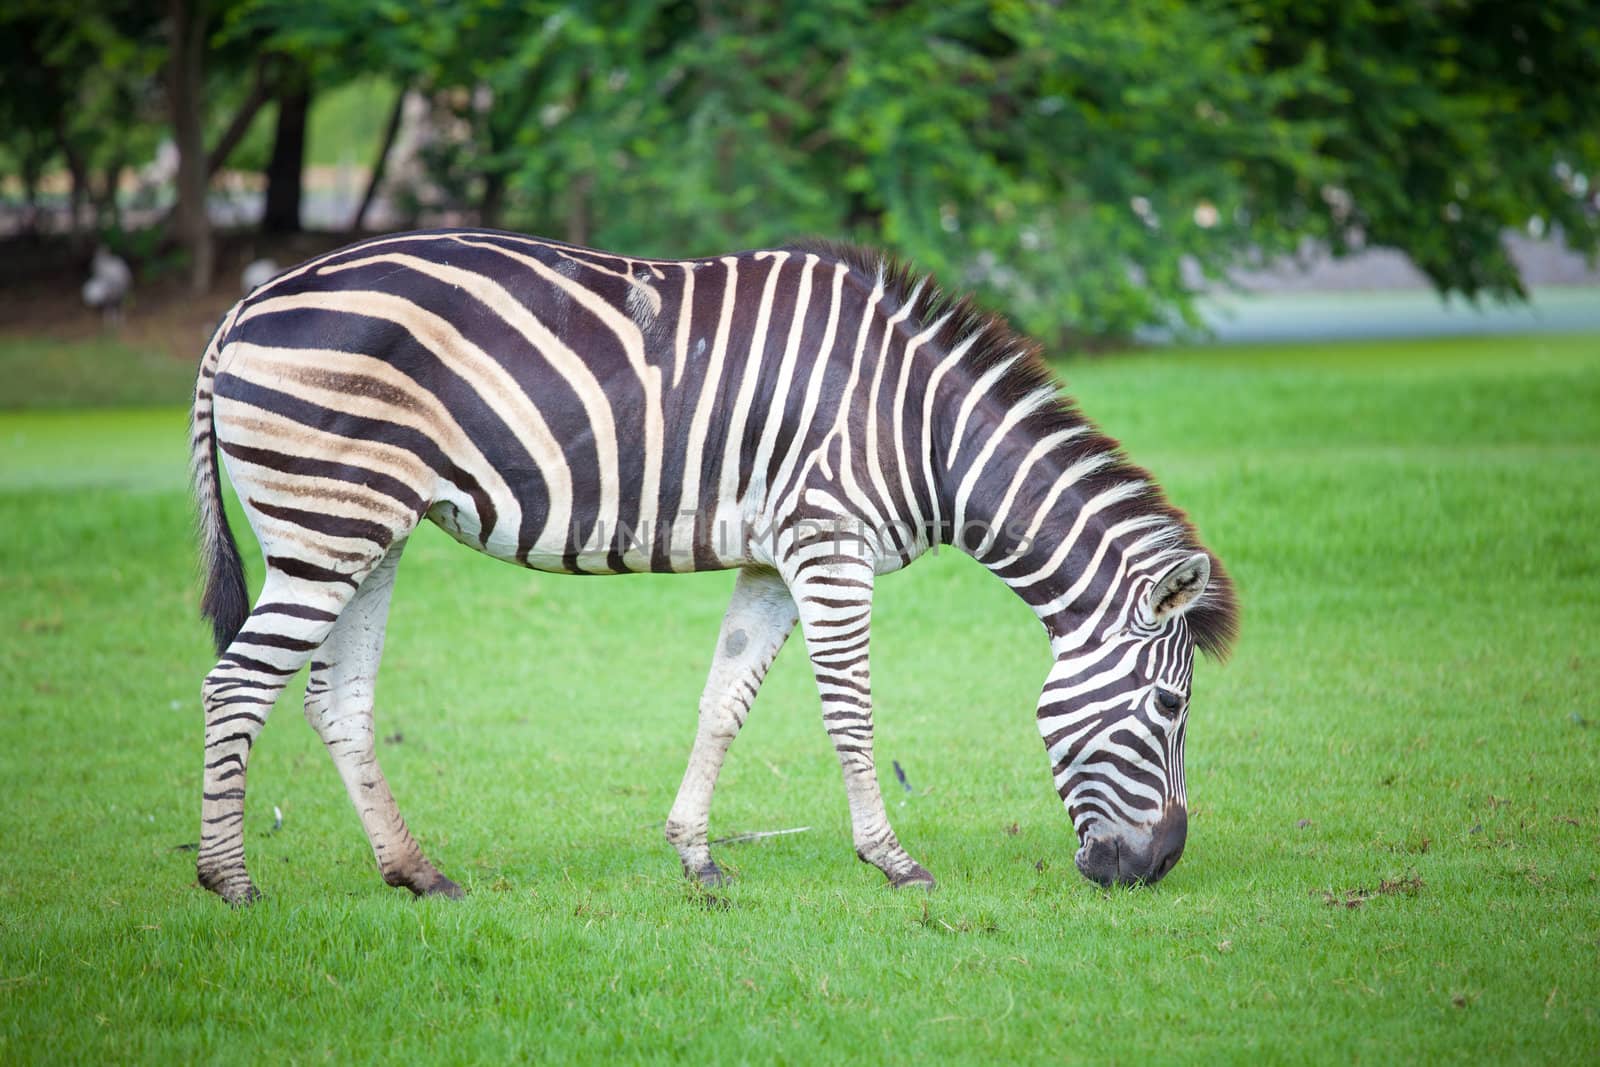 zebra was eating grass in the park